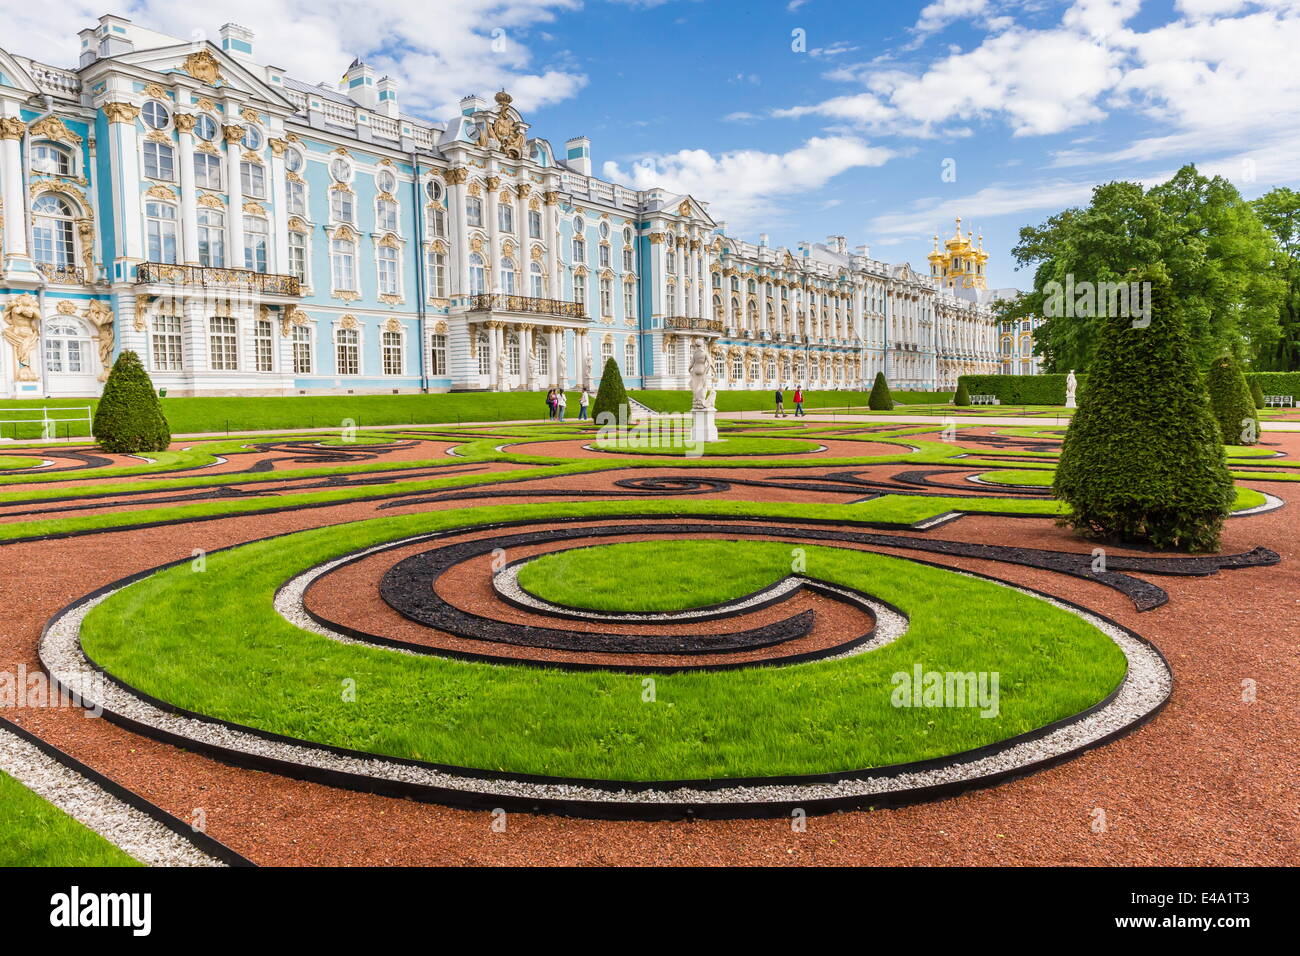 View of the French-style formal gardens at the Catherine Palace, Tsarskoe Selo, St. Petersburg, Russia, Europe Stock Photo